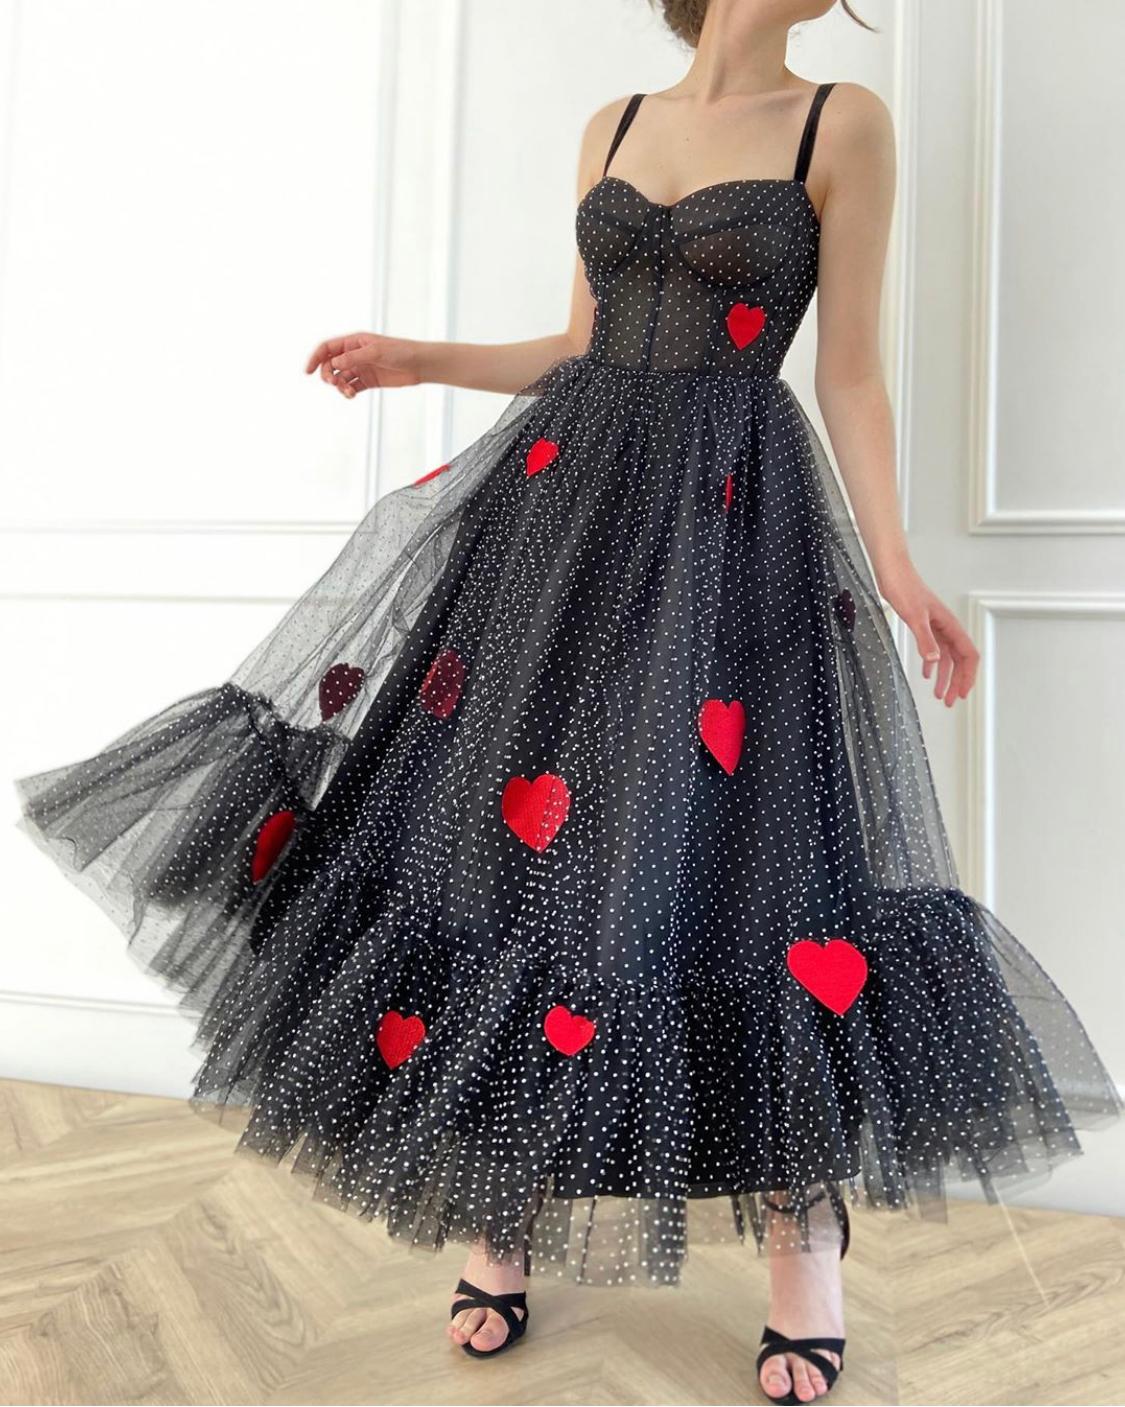 Black midi dotted dress with spaghetti straps and embroidered hearts